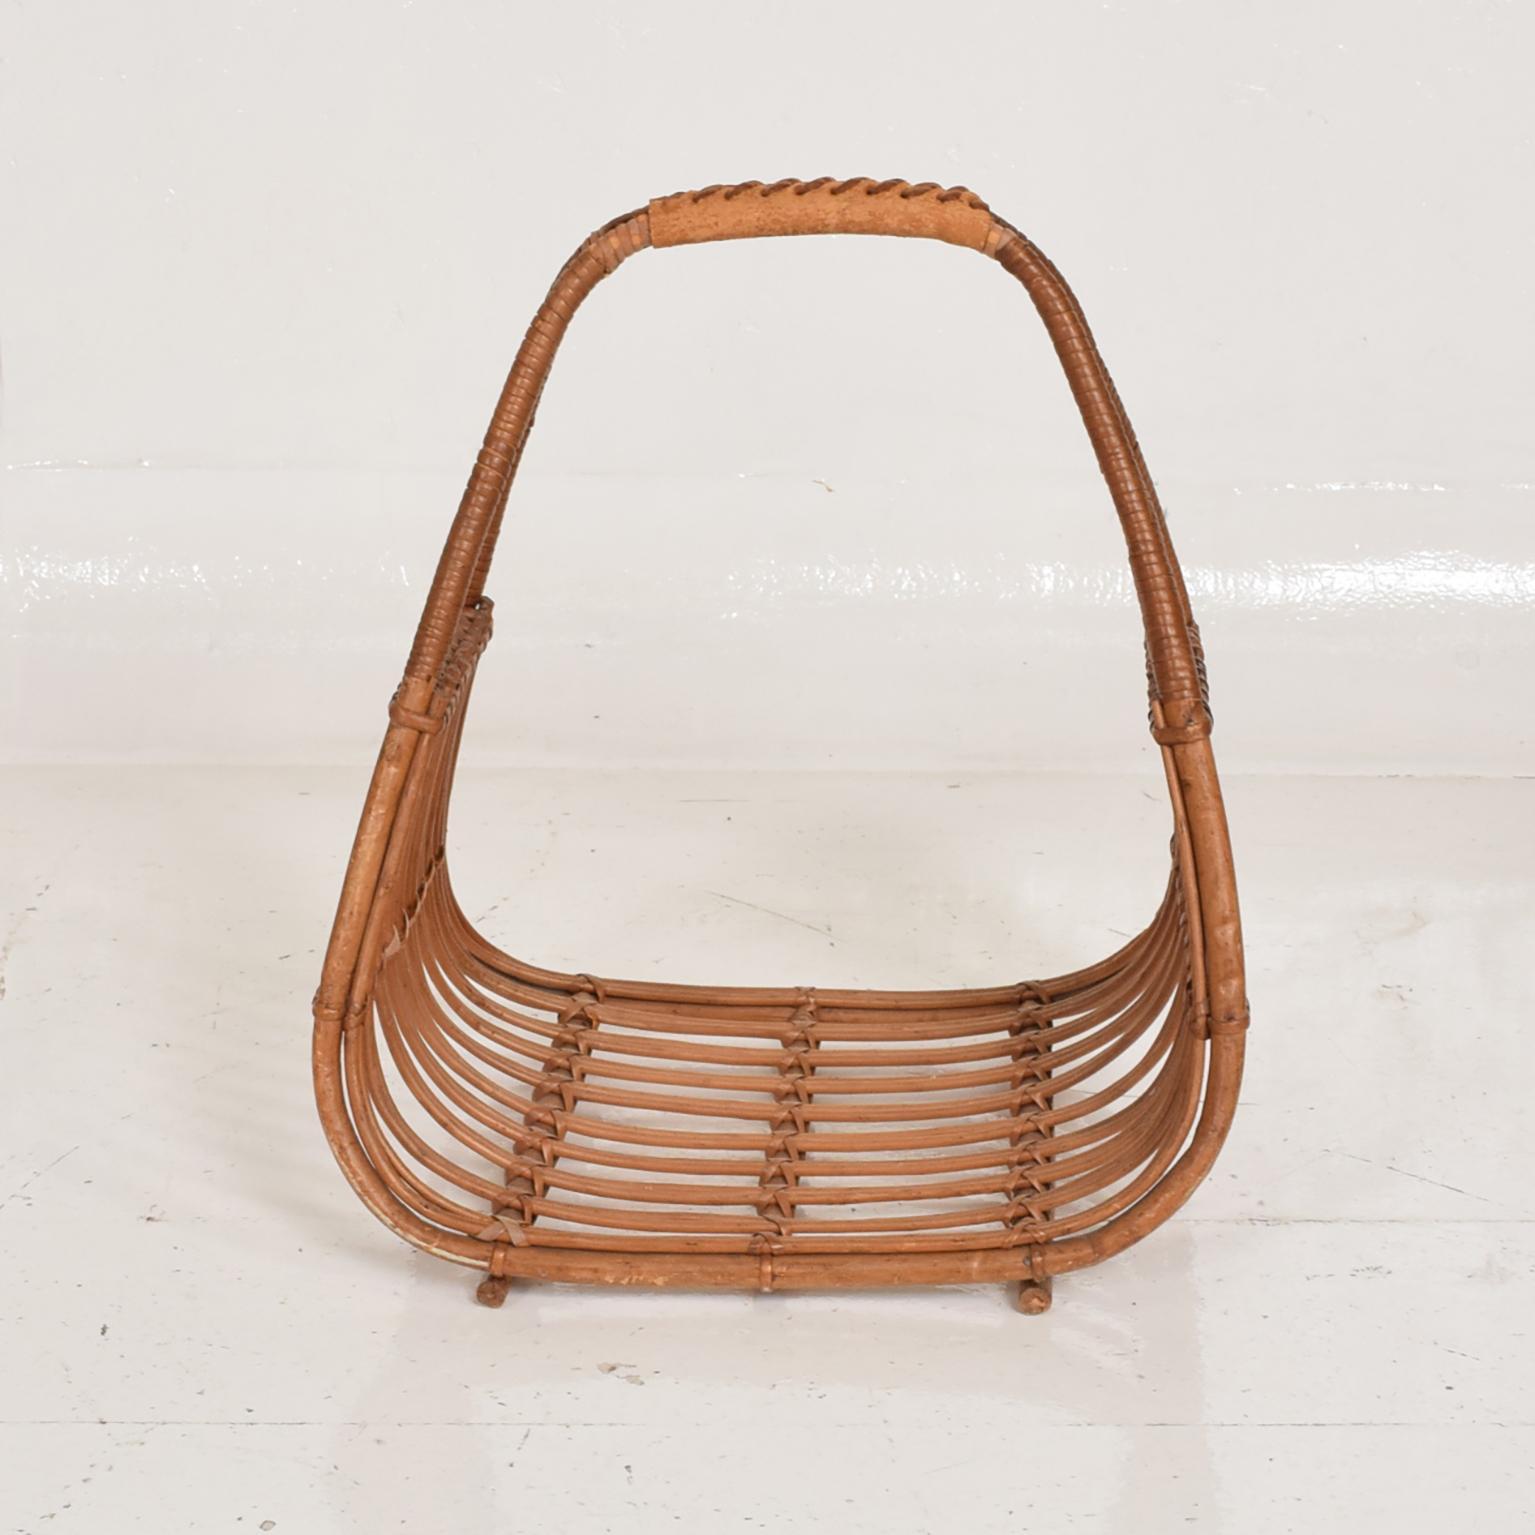 For your consideration, a Mid-Century Modern Italian magazine rack holder basket after Franco Albini.

Made in Italy circa the 1960s. Sculptural shape in rattan and leather. 

Unmarked. 

Dimensions: 8 1/2